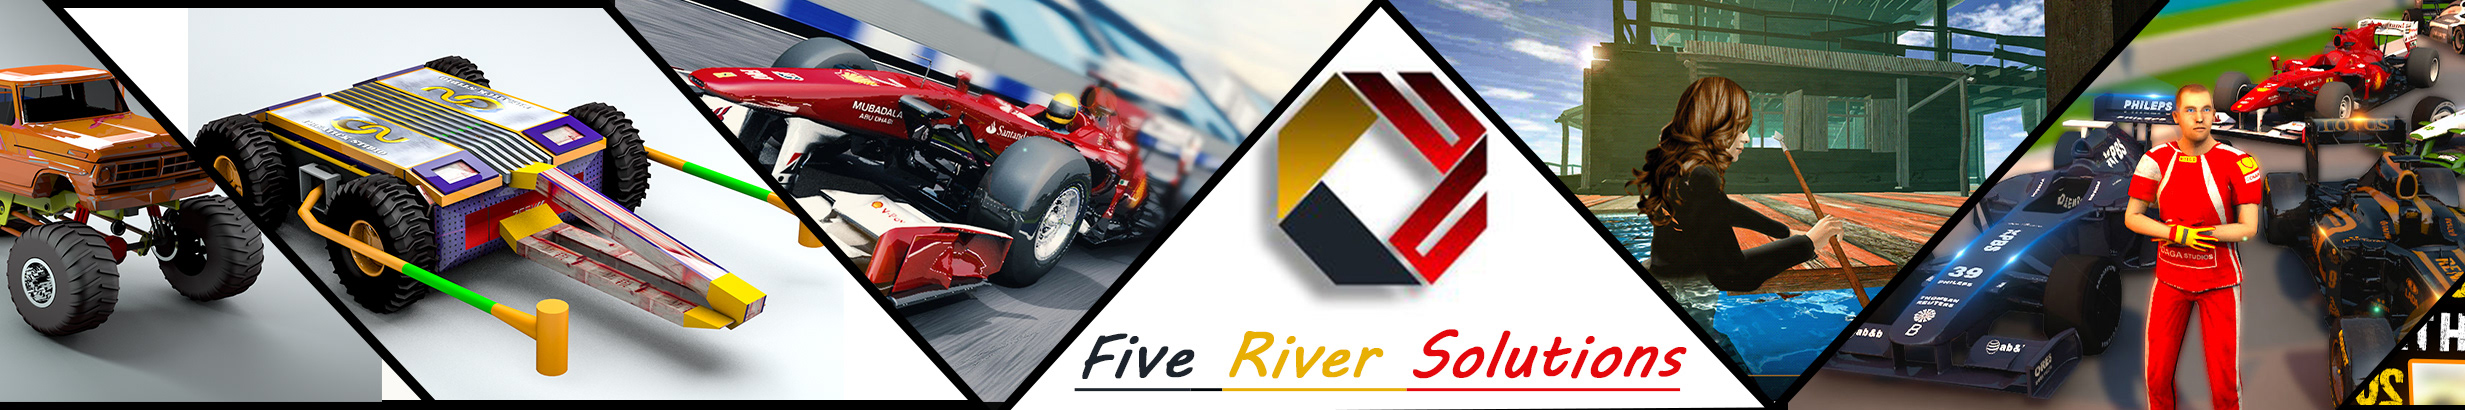 FRS (Five River Solutions)'s profile banner